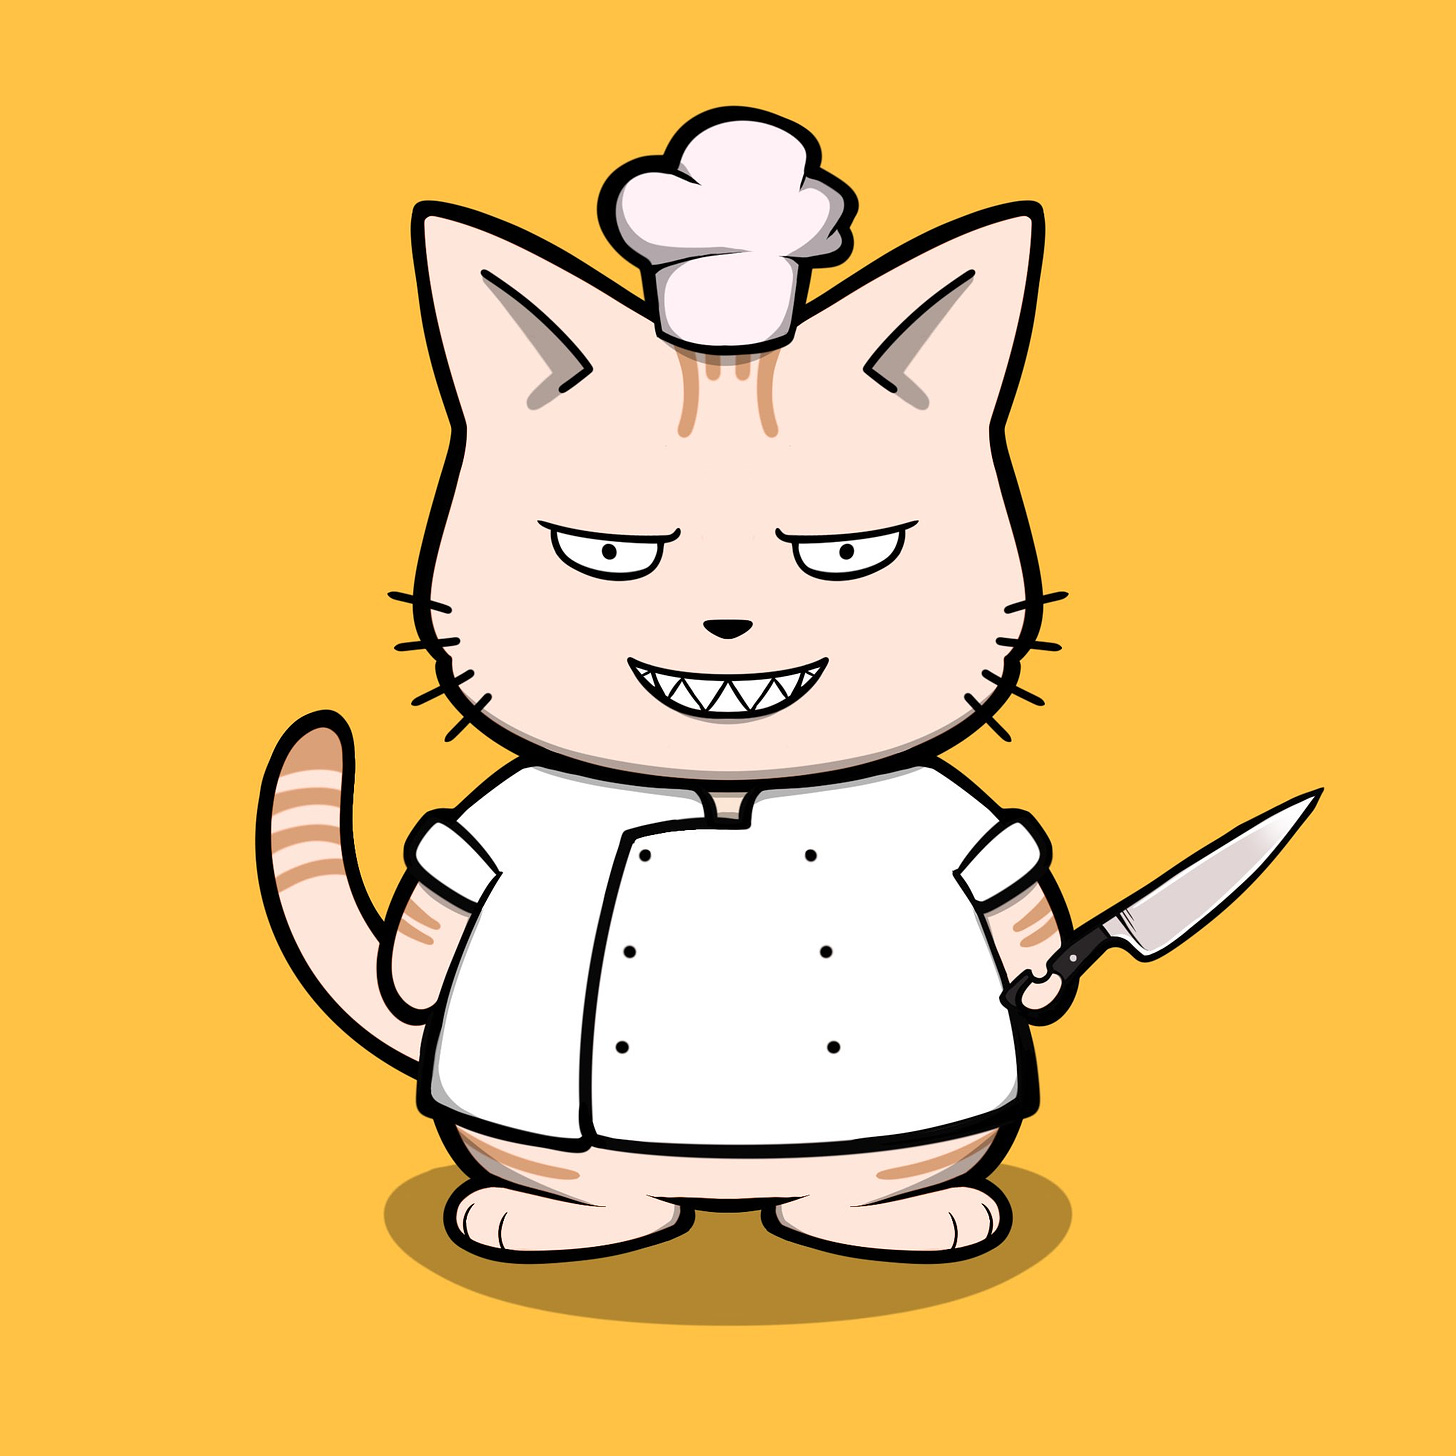 A cat in a chef's outfit with a knife.